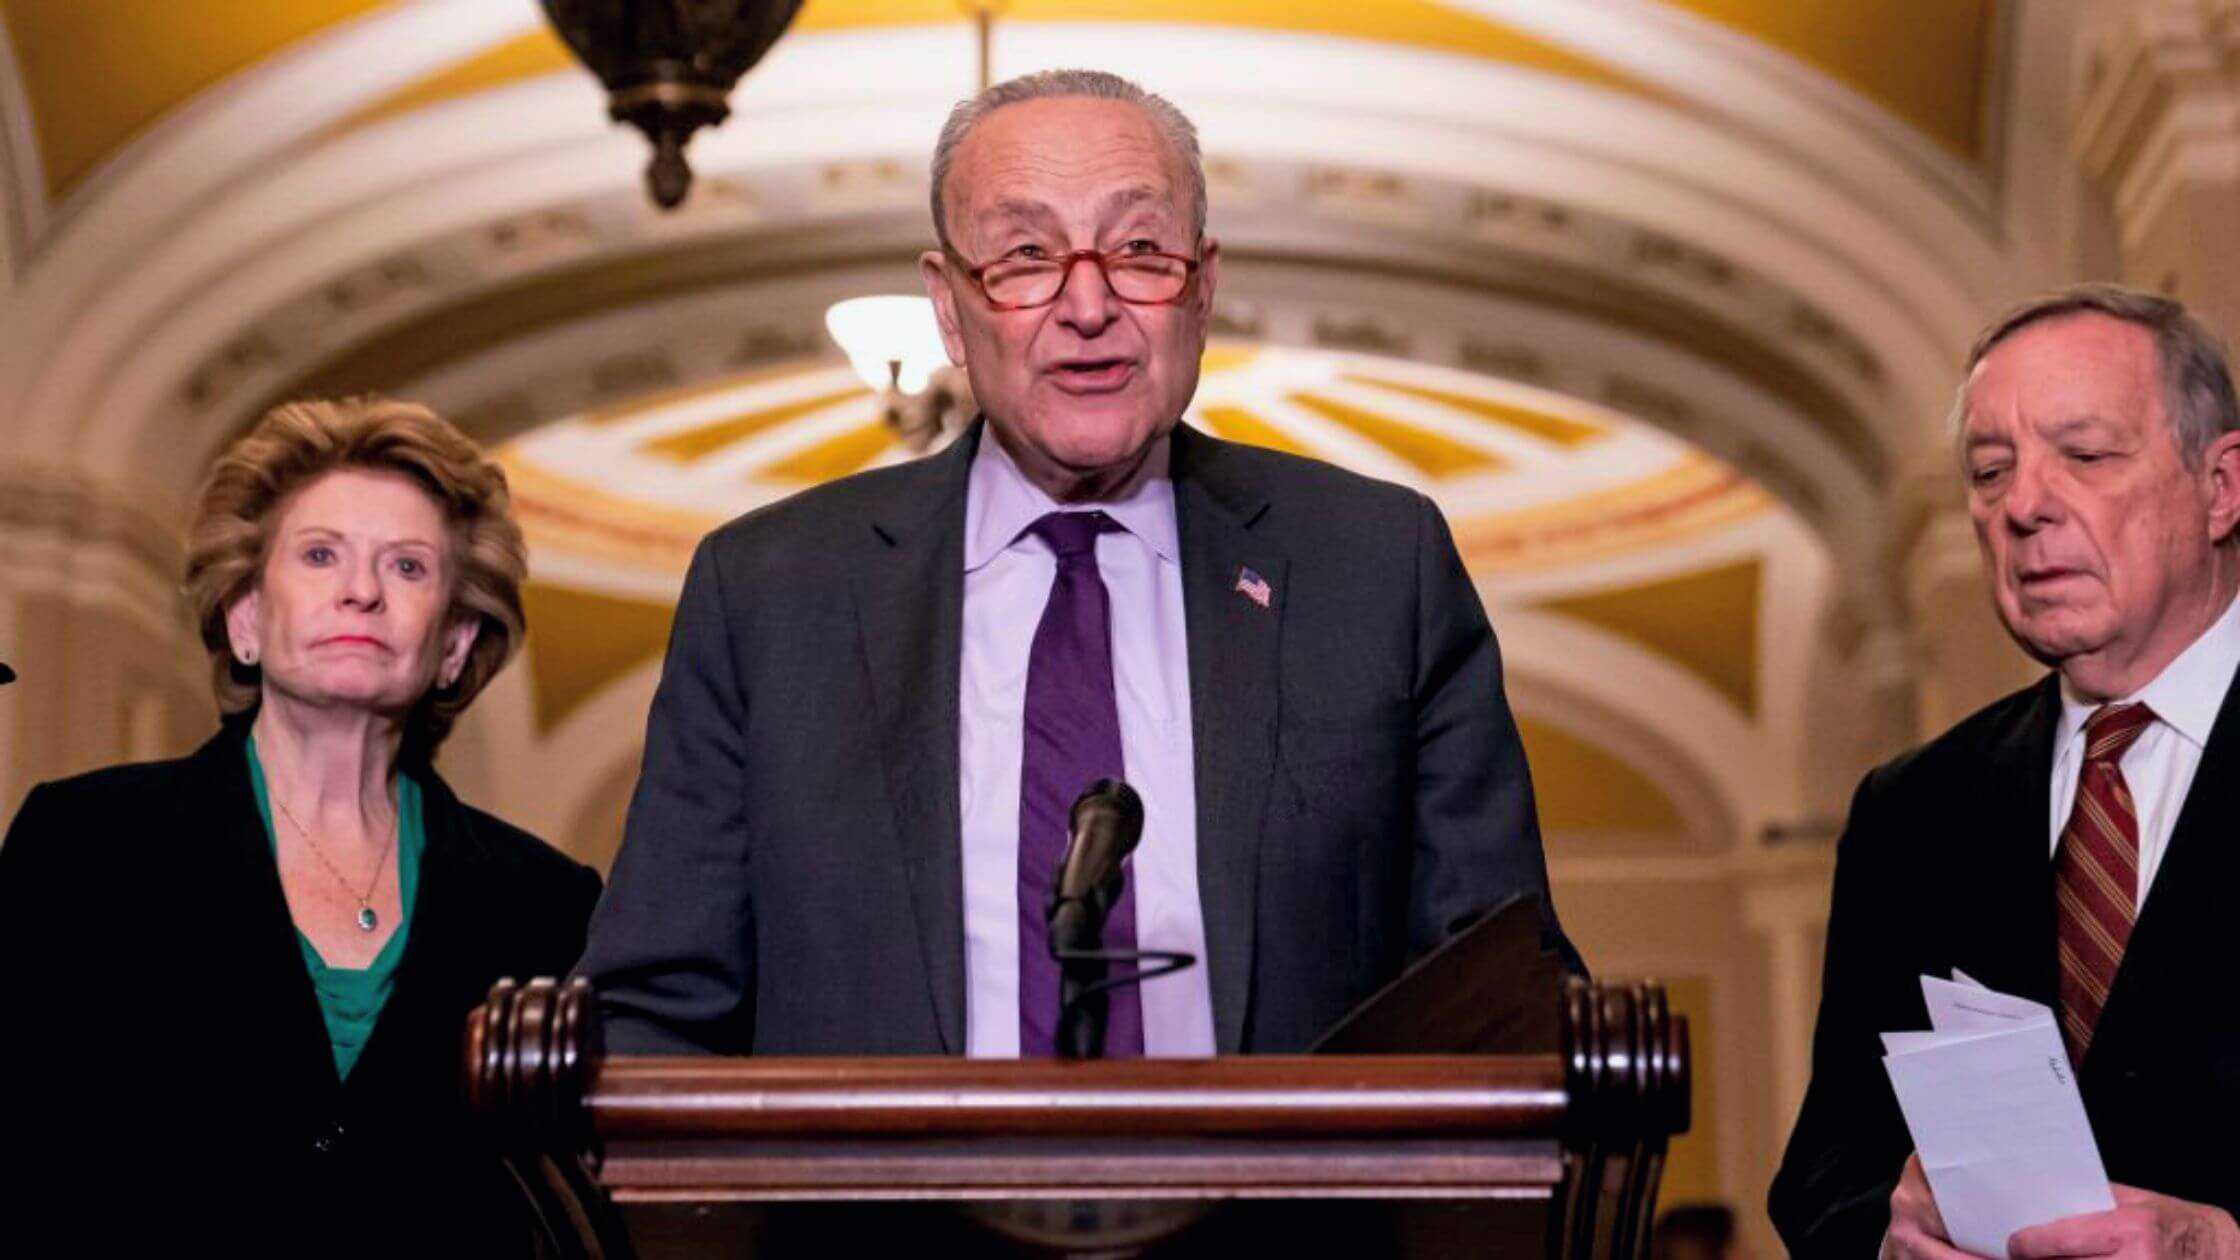 As Discussions Go Schumer Says Lawmakers To Be Ready For A One-week Funding Stopgap